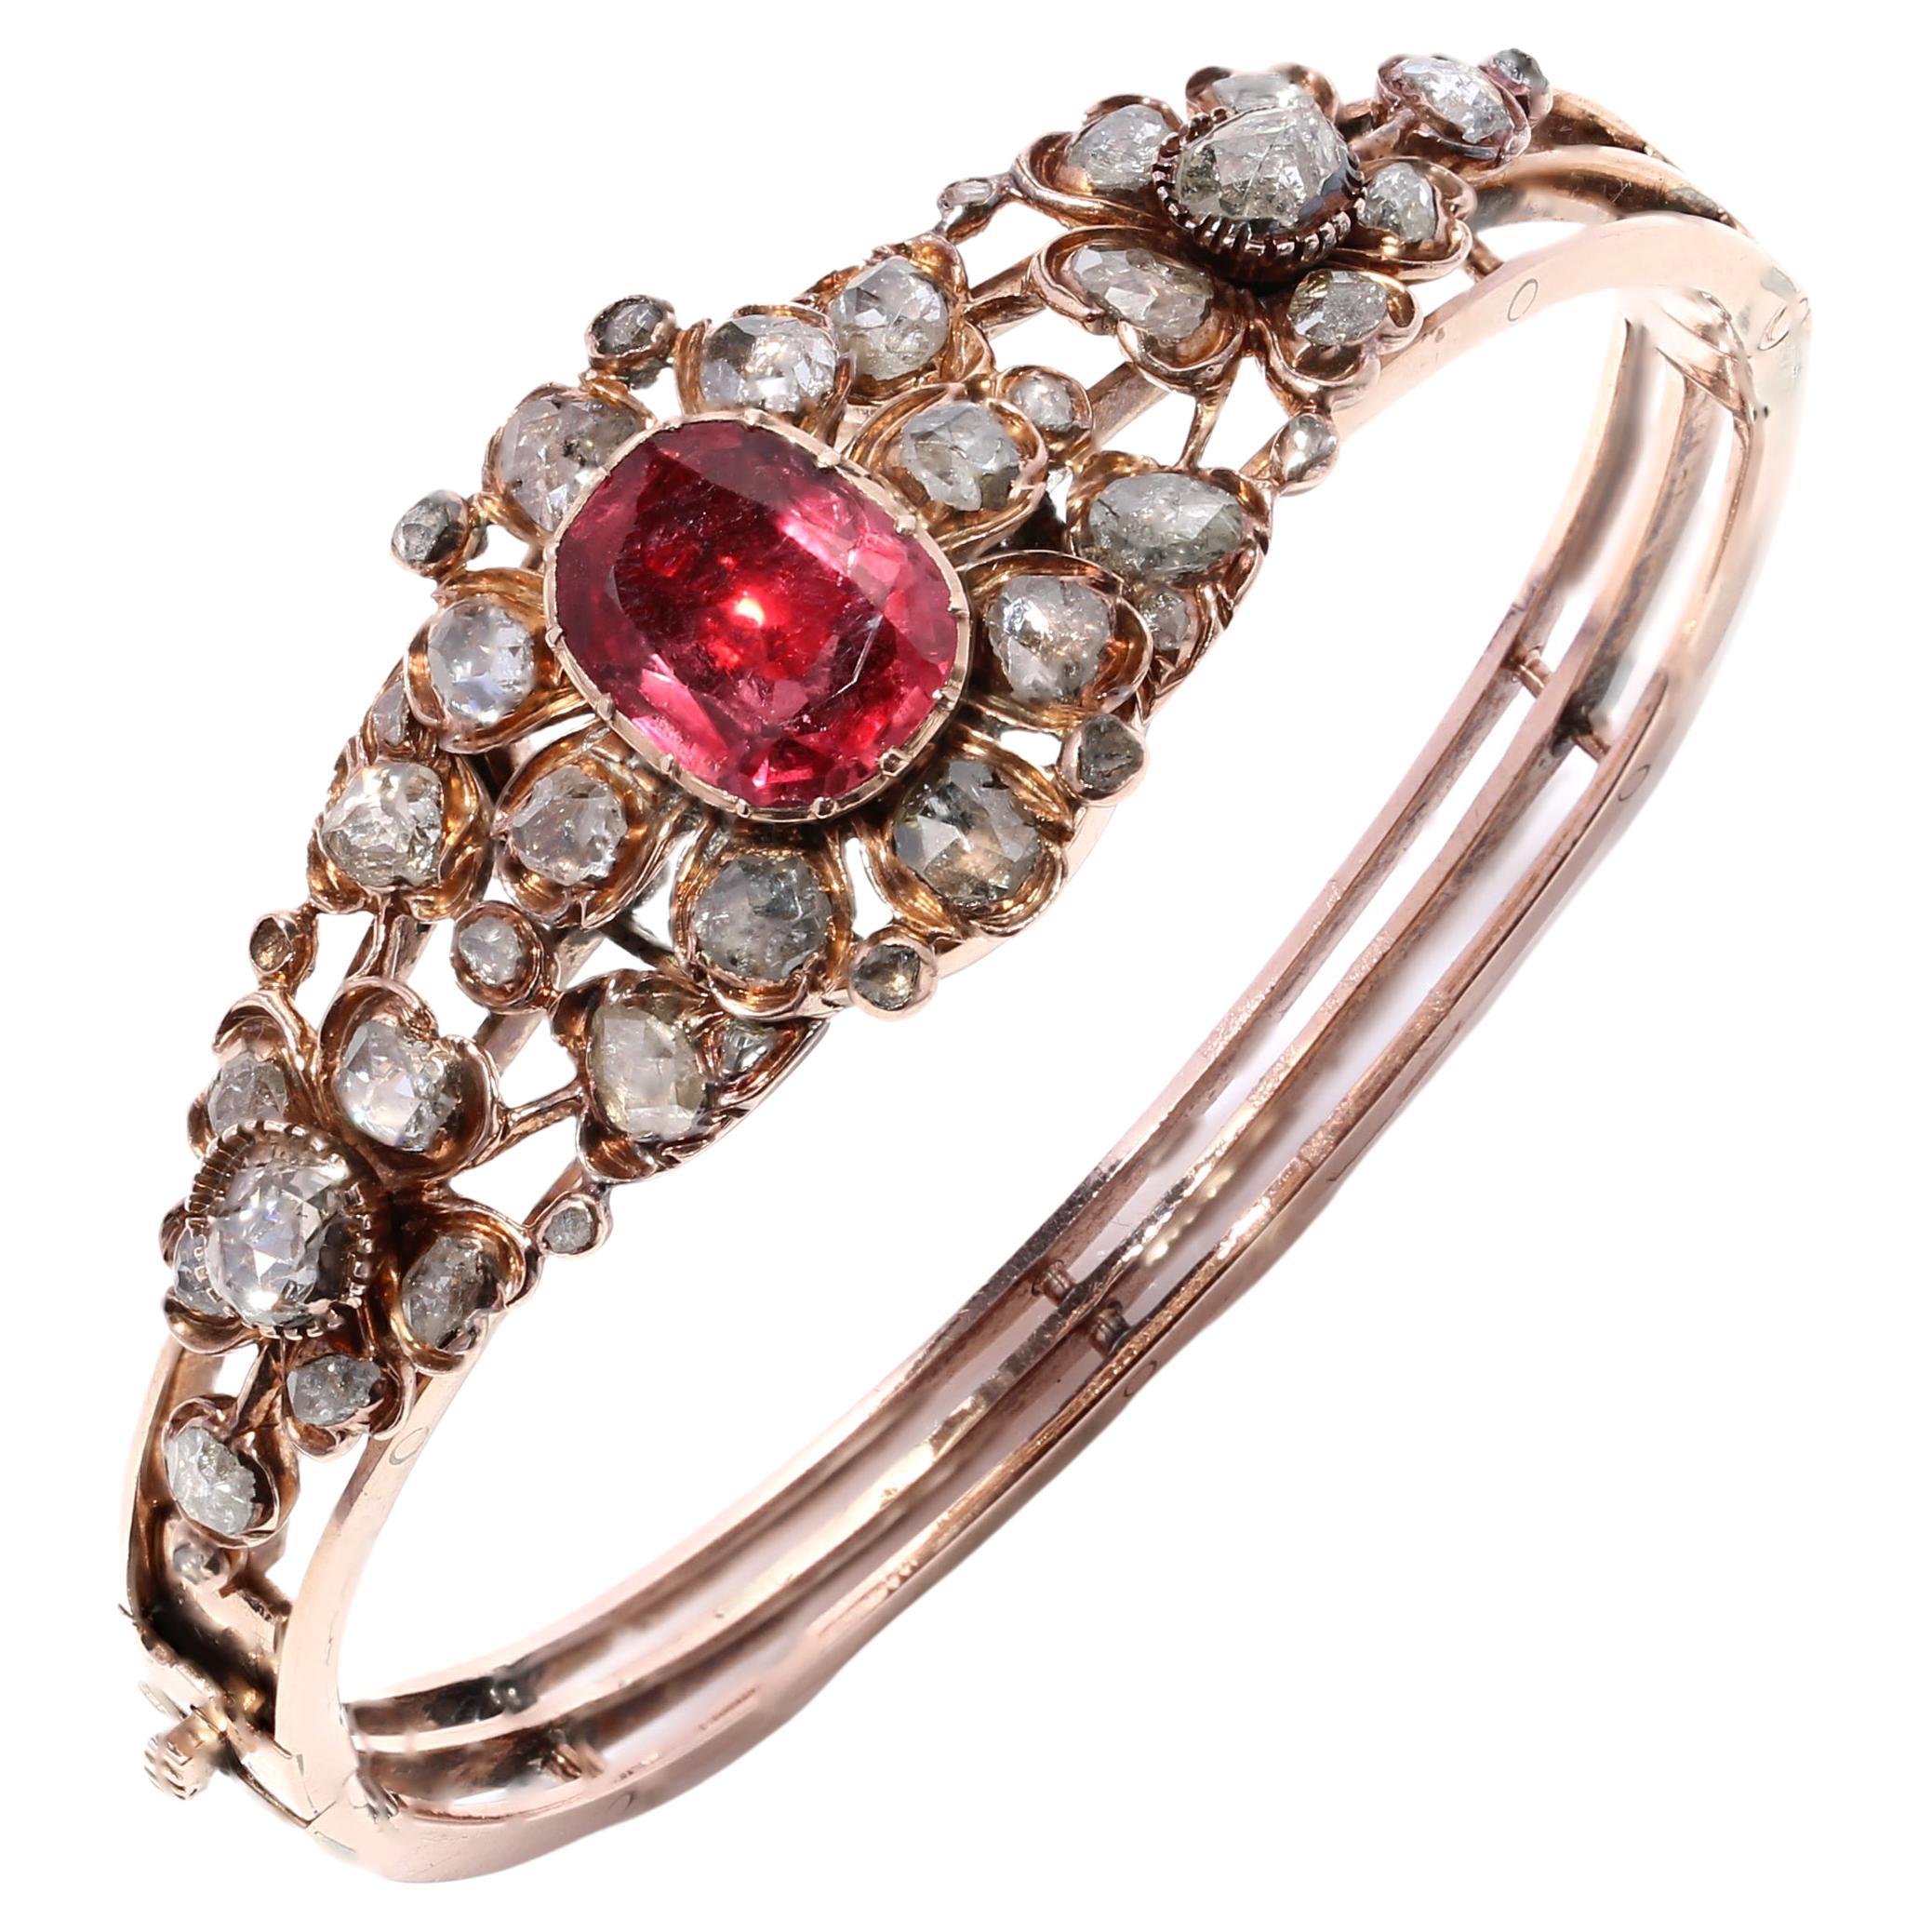 Victorian 15kt Rose Gold Ladies Bangle with 4.00 Ct Spinel and 4.52 Ct Diamond For Sale